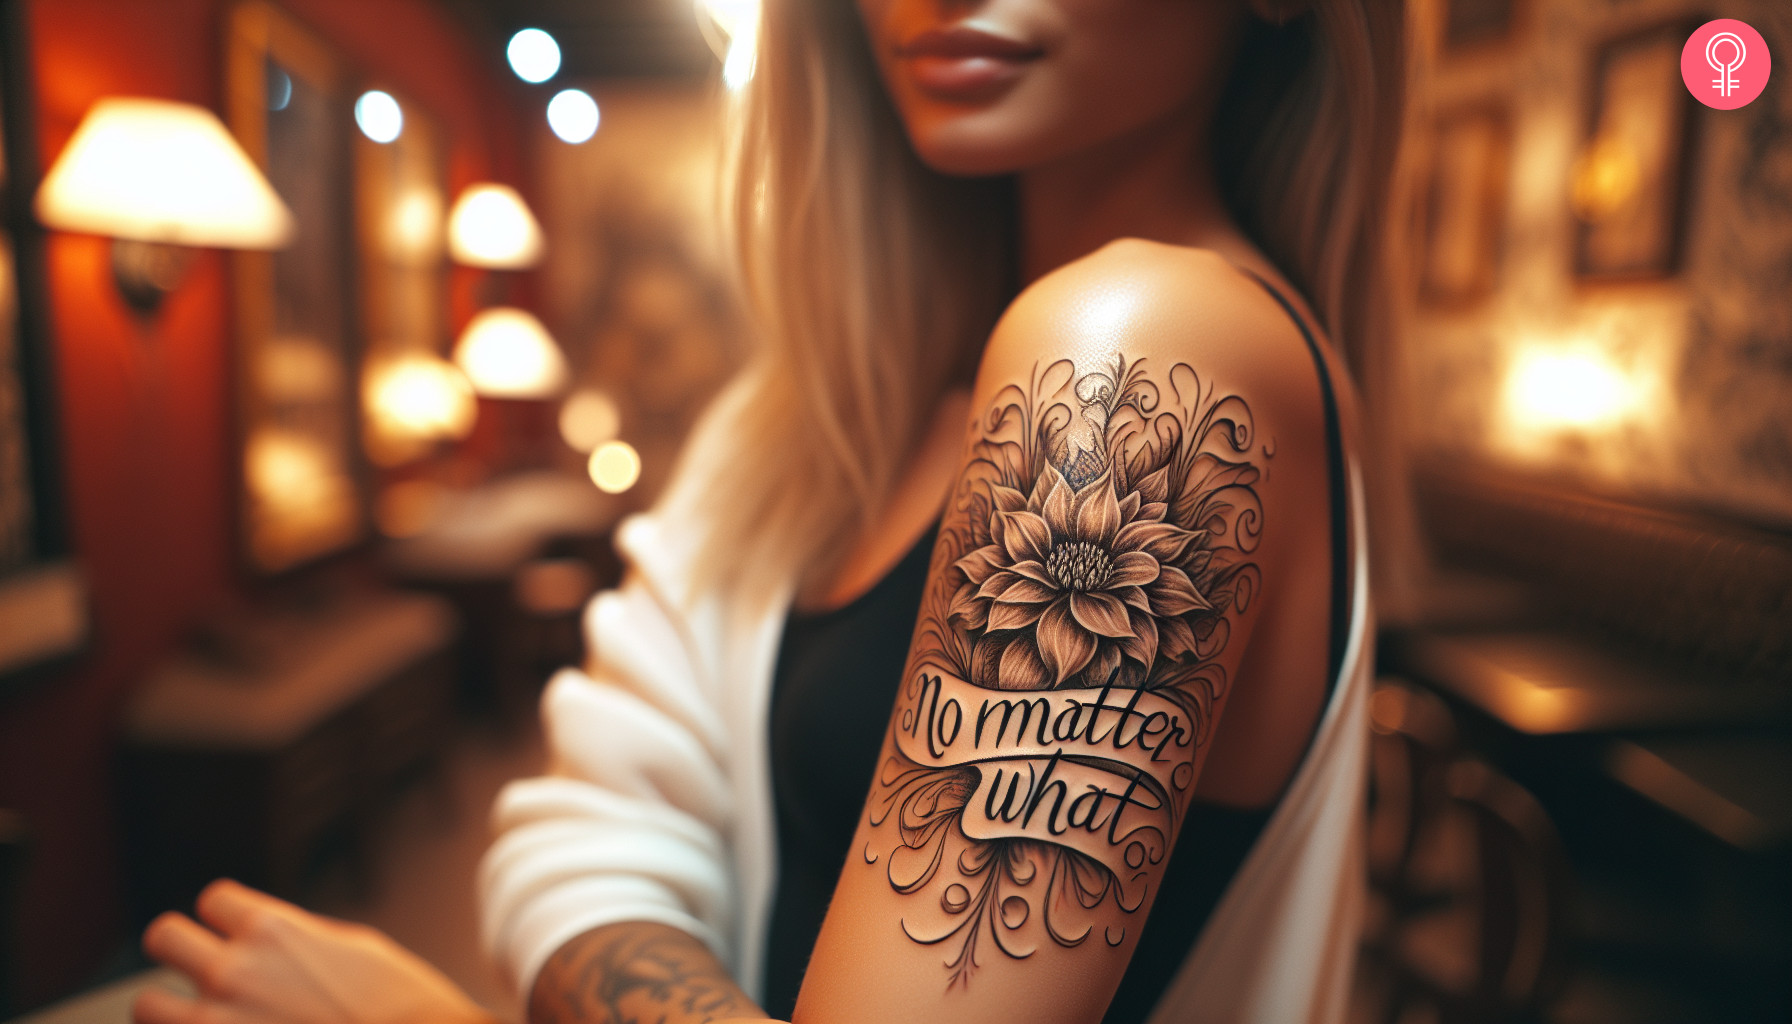 ‘No matter what’ tattoo with flower on the arm of a woman